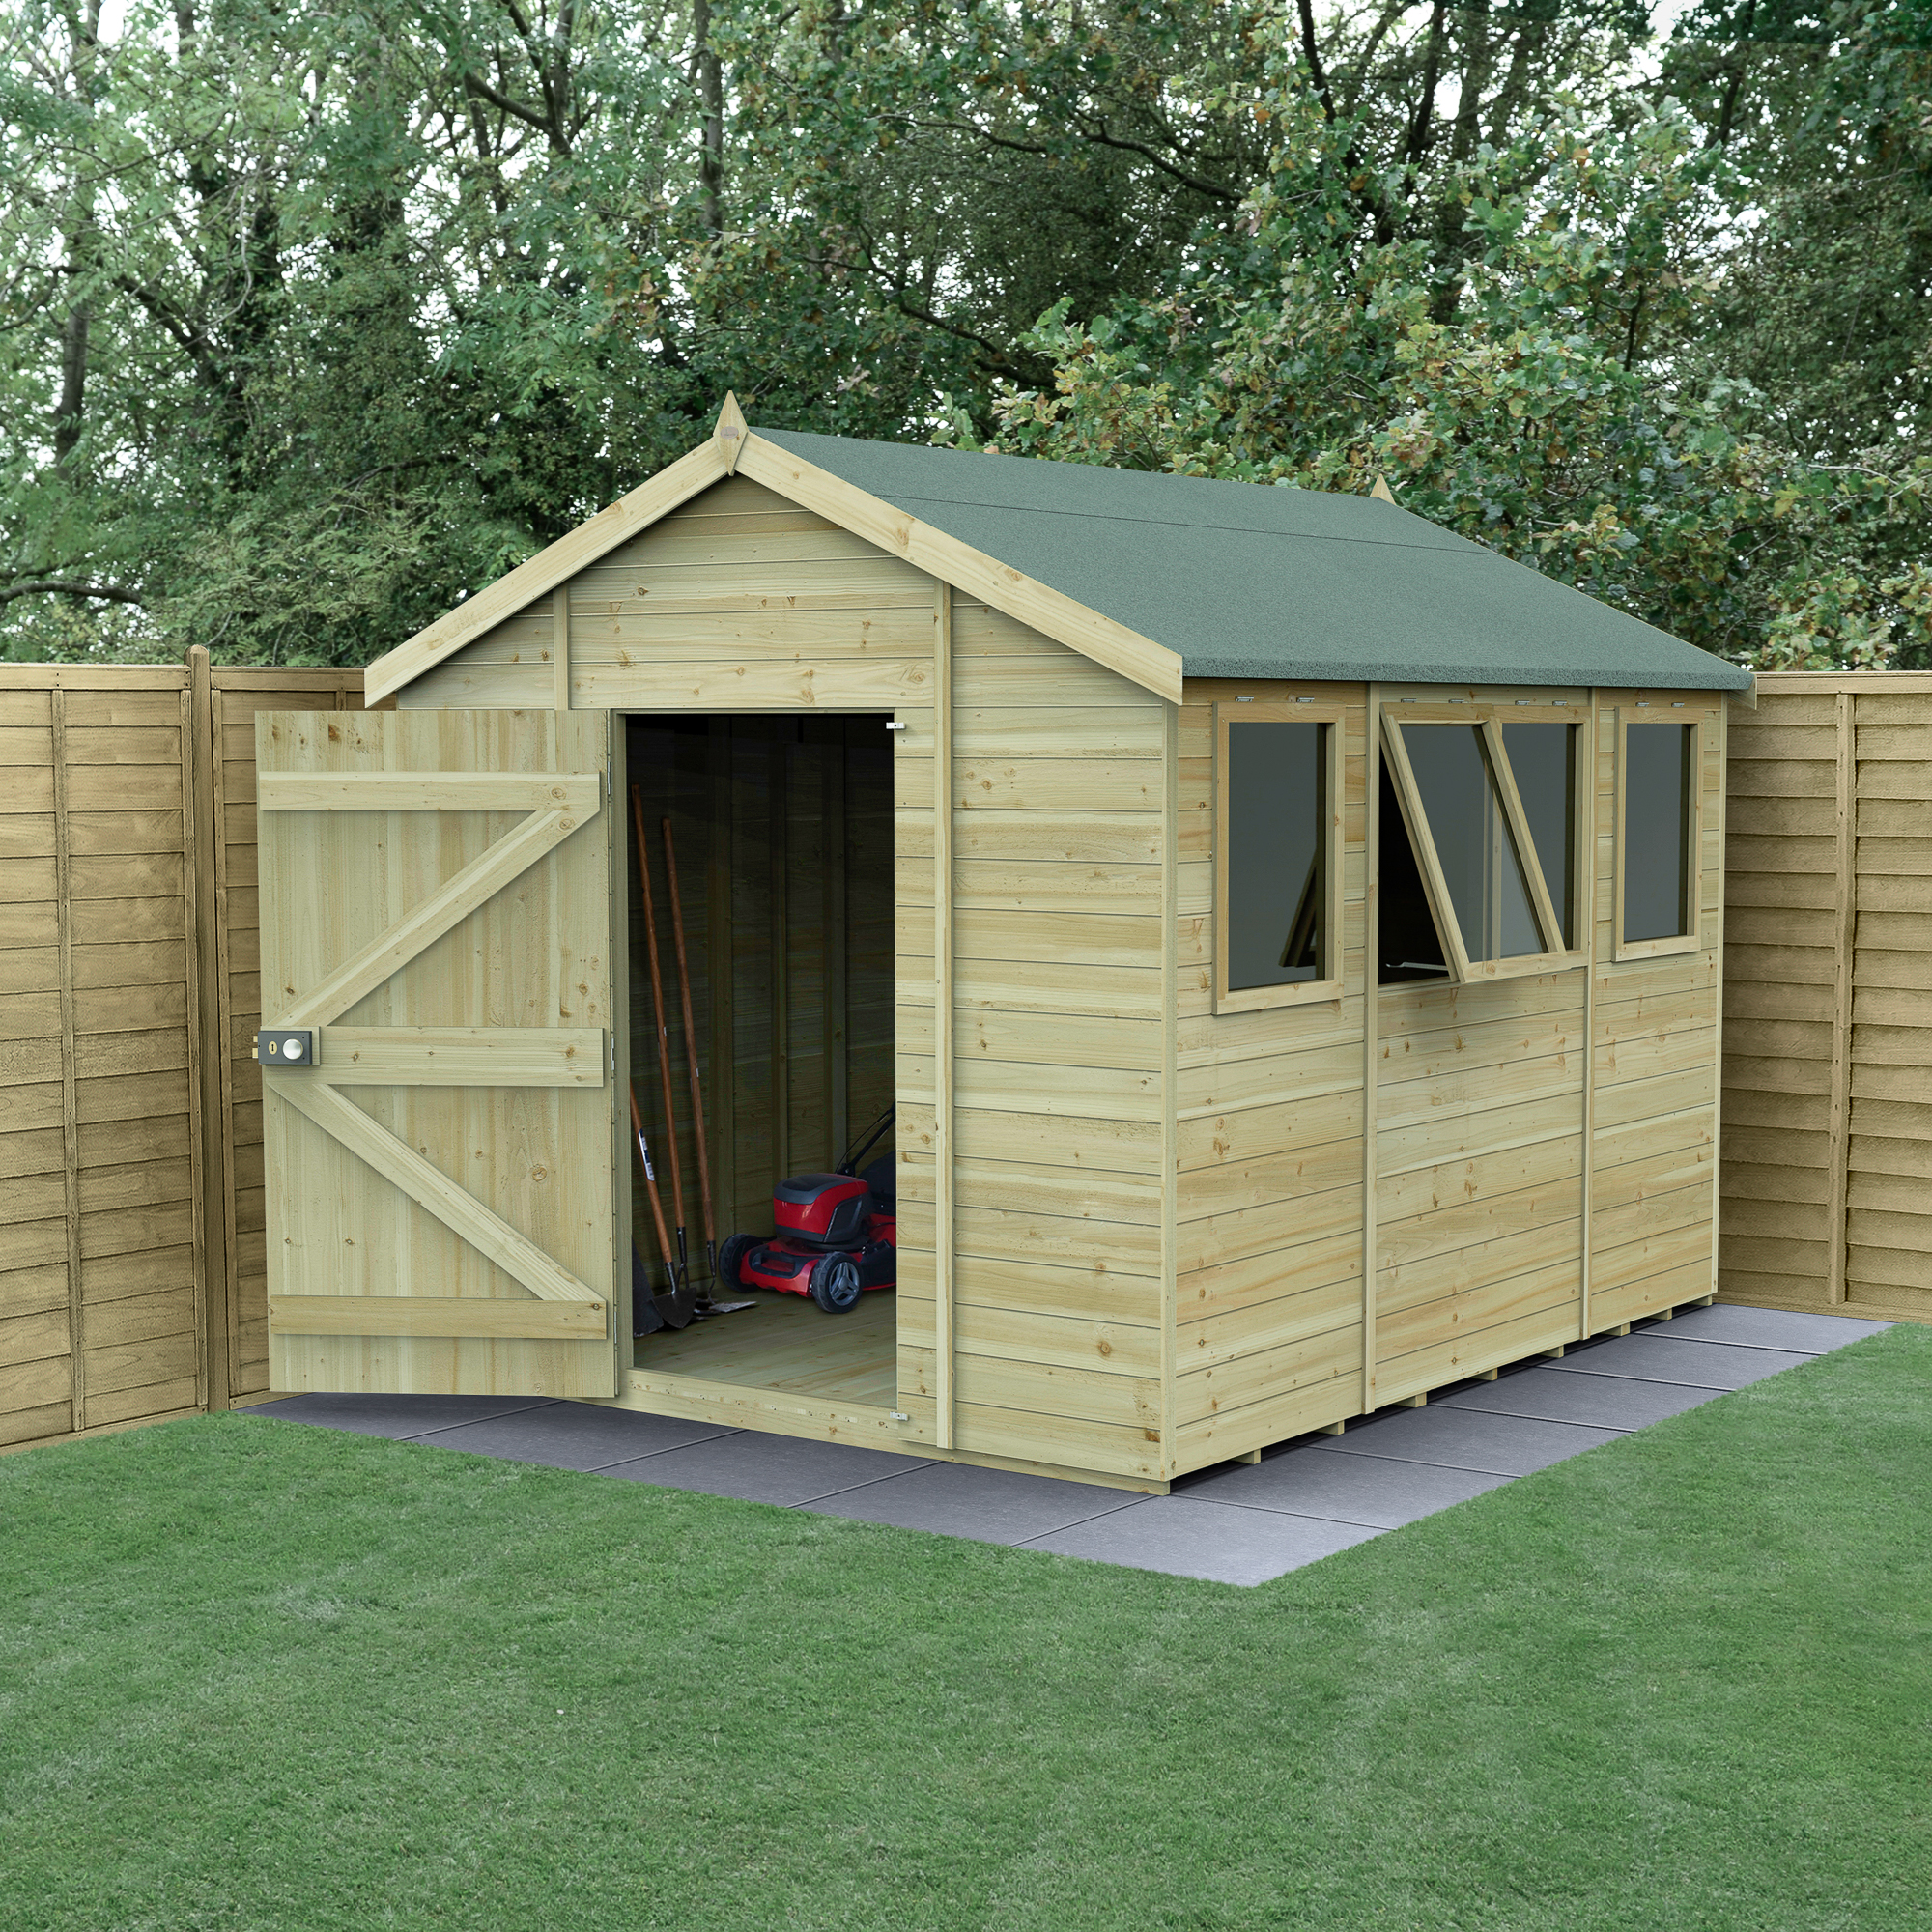 Forest Garden Timberdale 8 x 10ft Apex Tongue & Groove Pressure Treated Shed (4 Opening Windows)